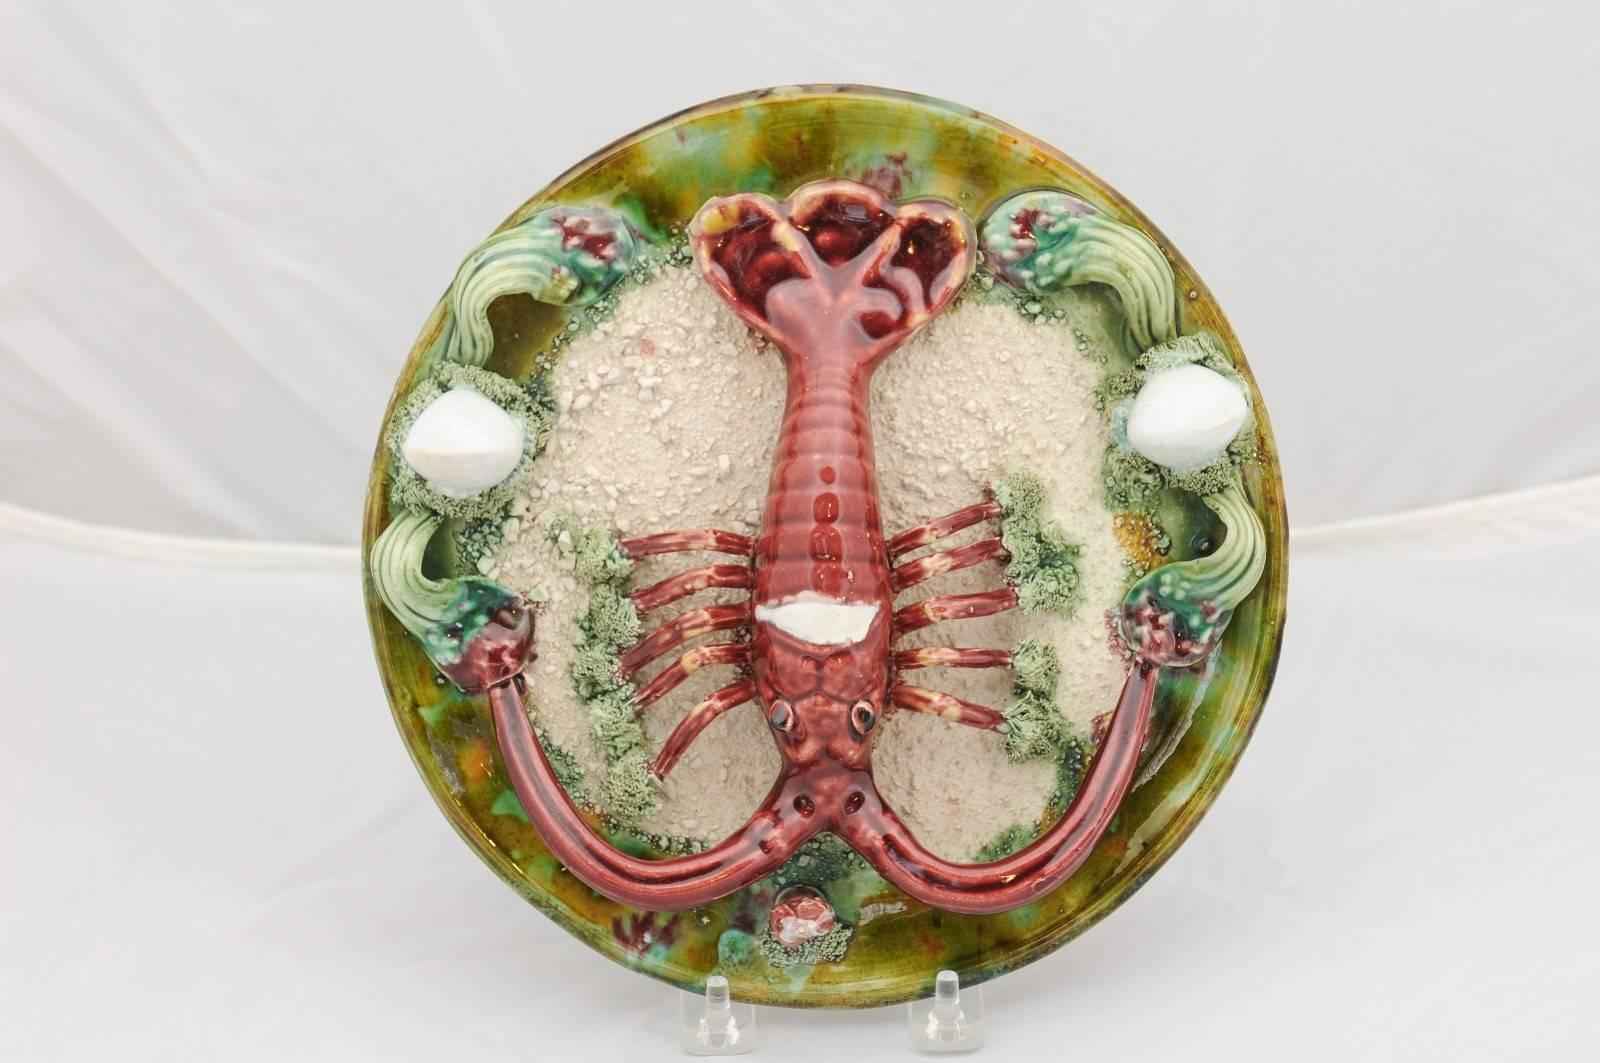 A Portuguese 1920s Palissy style majolica plate with lobster motif. This majolica plate from the early 20th century was composted in the manner of Bernard Palissy, a French Renaissance craftsman whose passion was the depiction of animals molded from